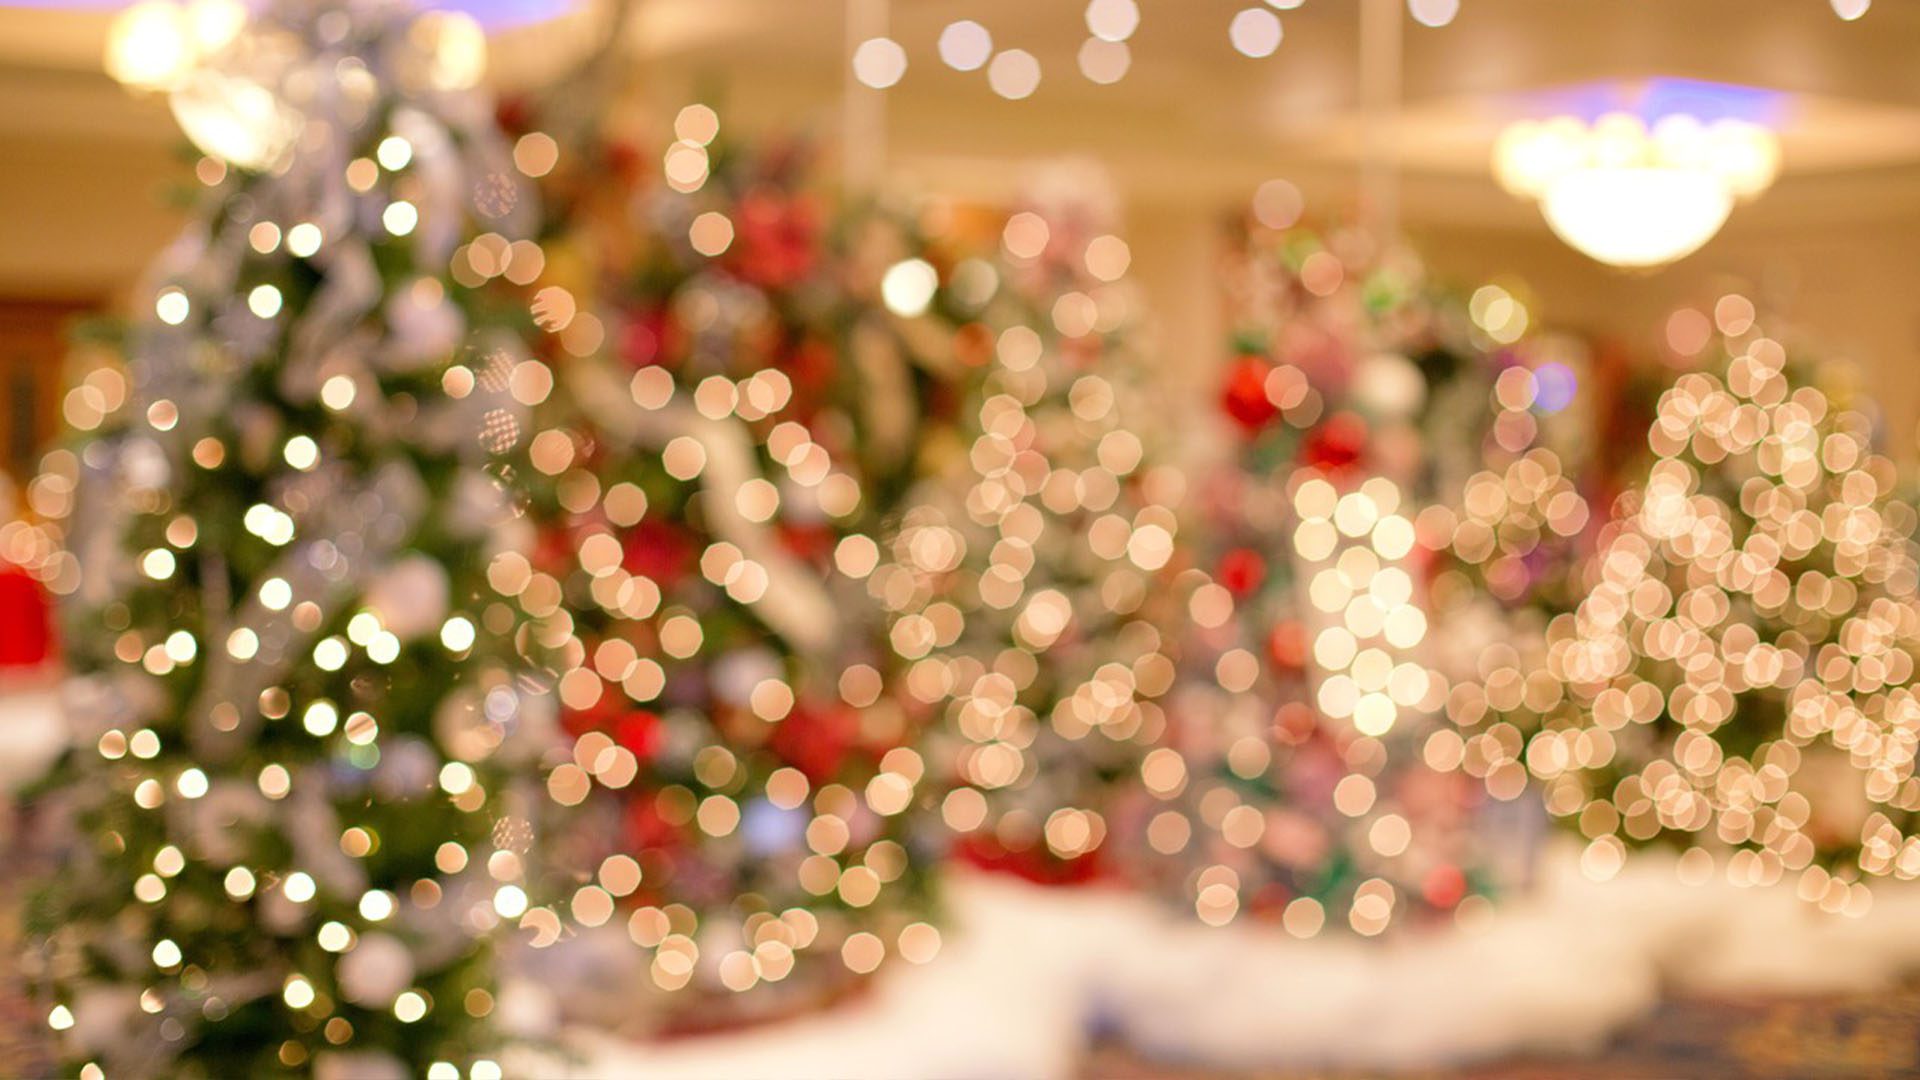 soft focus shot of decorated Christmas trees lined up in a hotel ballroom